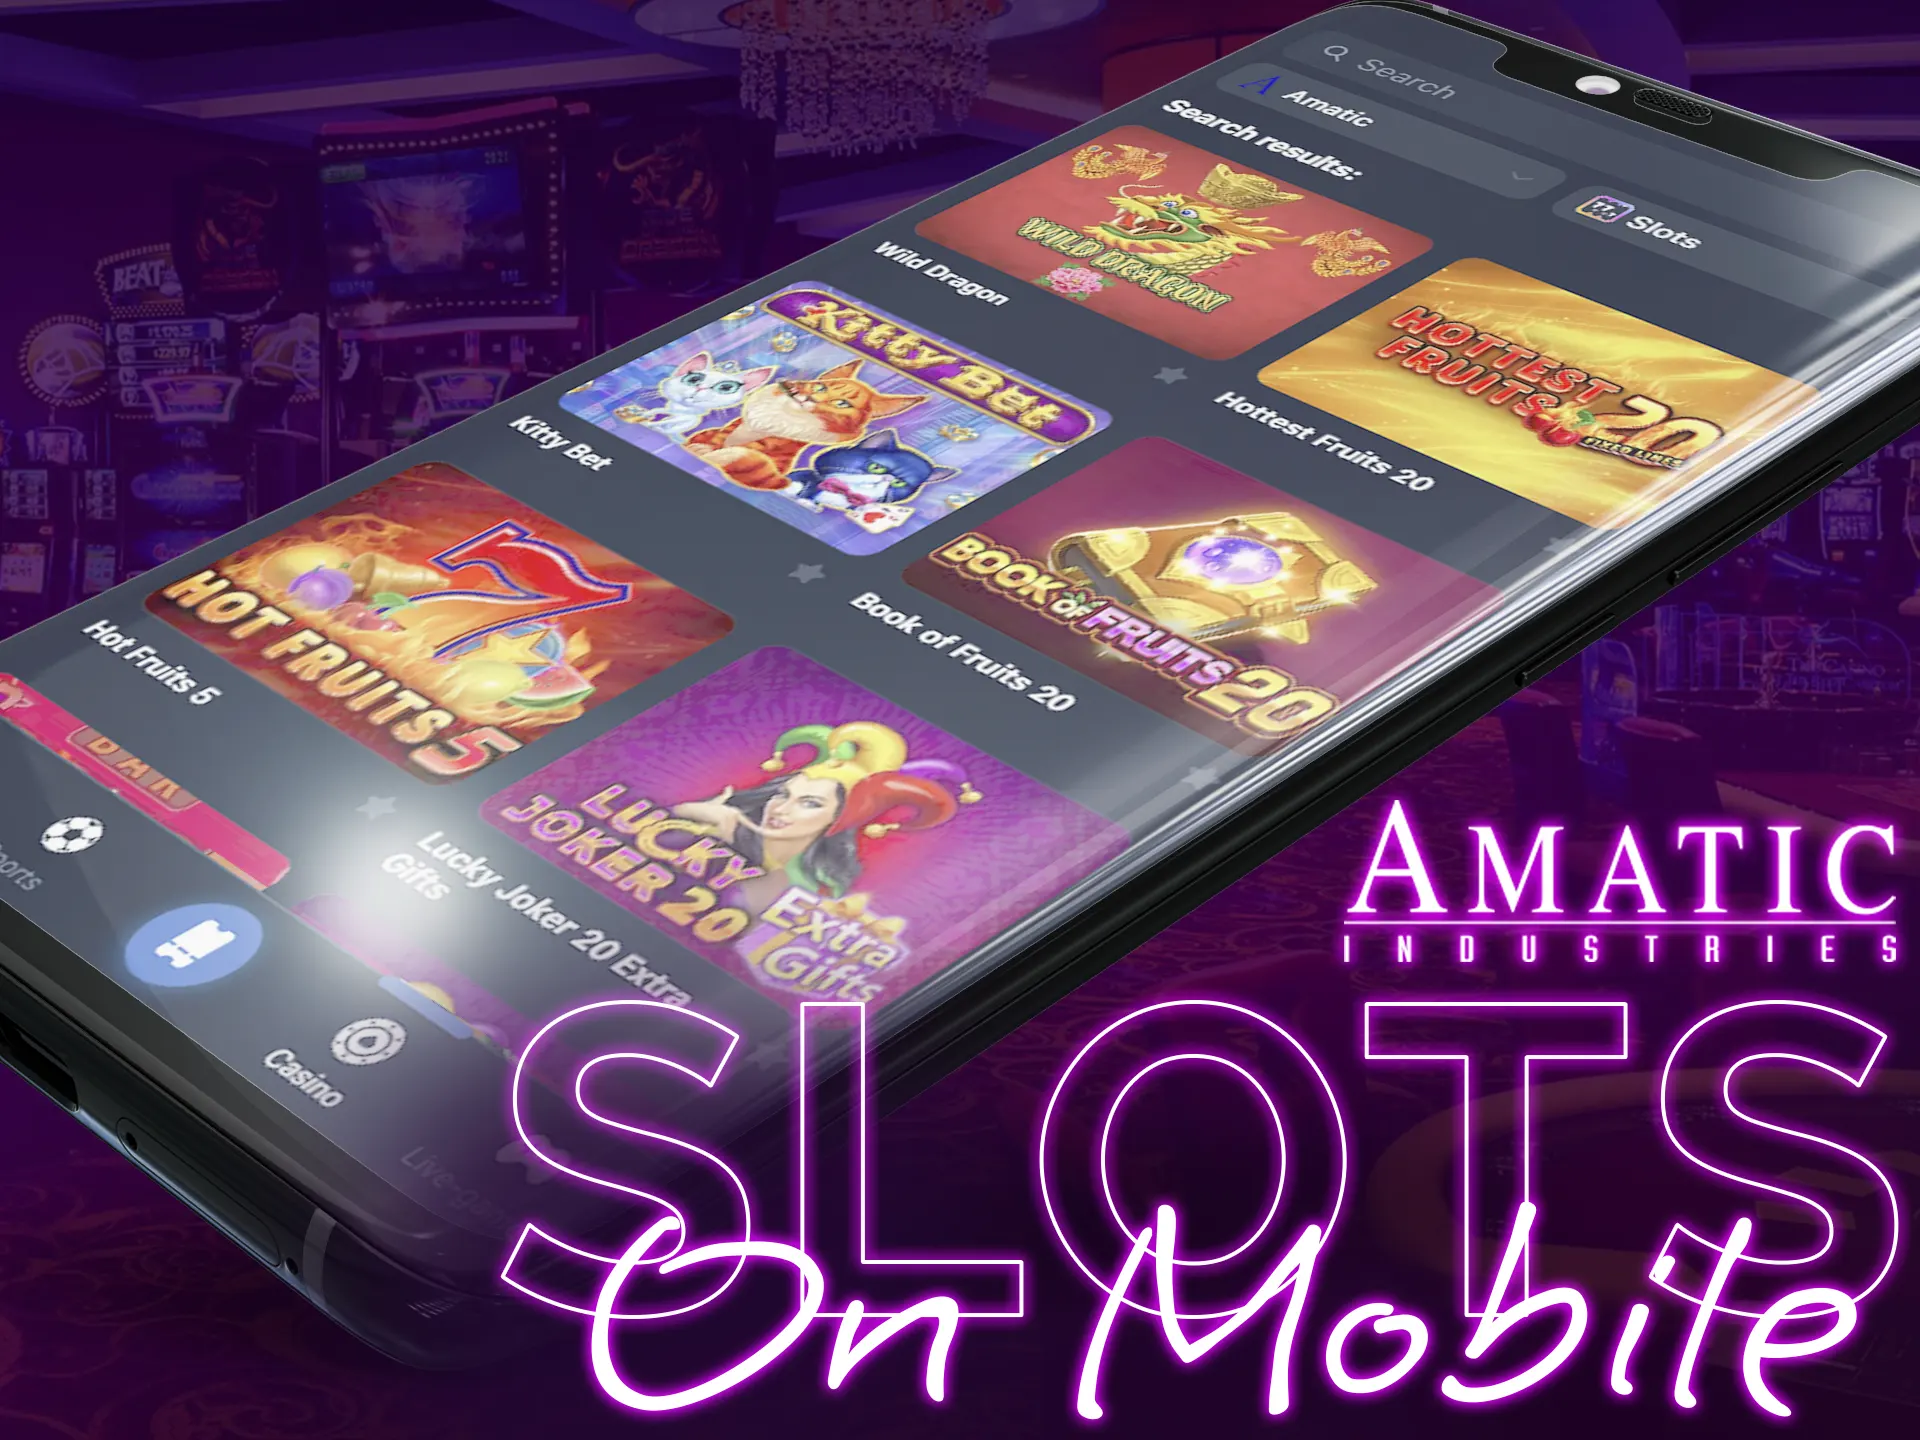 You can play games from Amatic on your Android or iOS device.